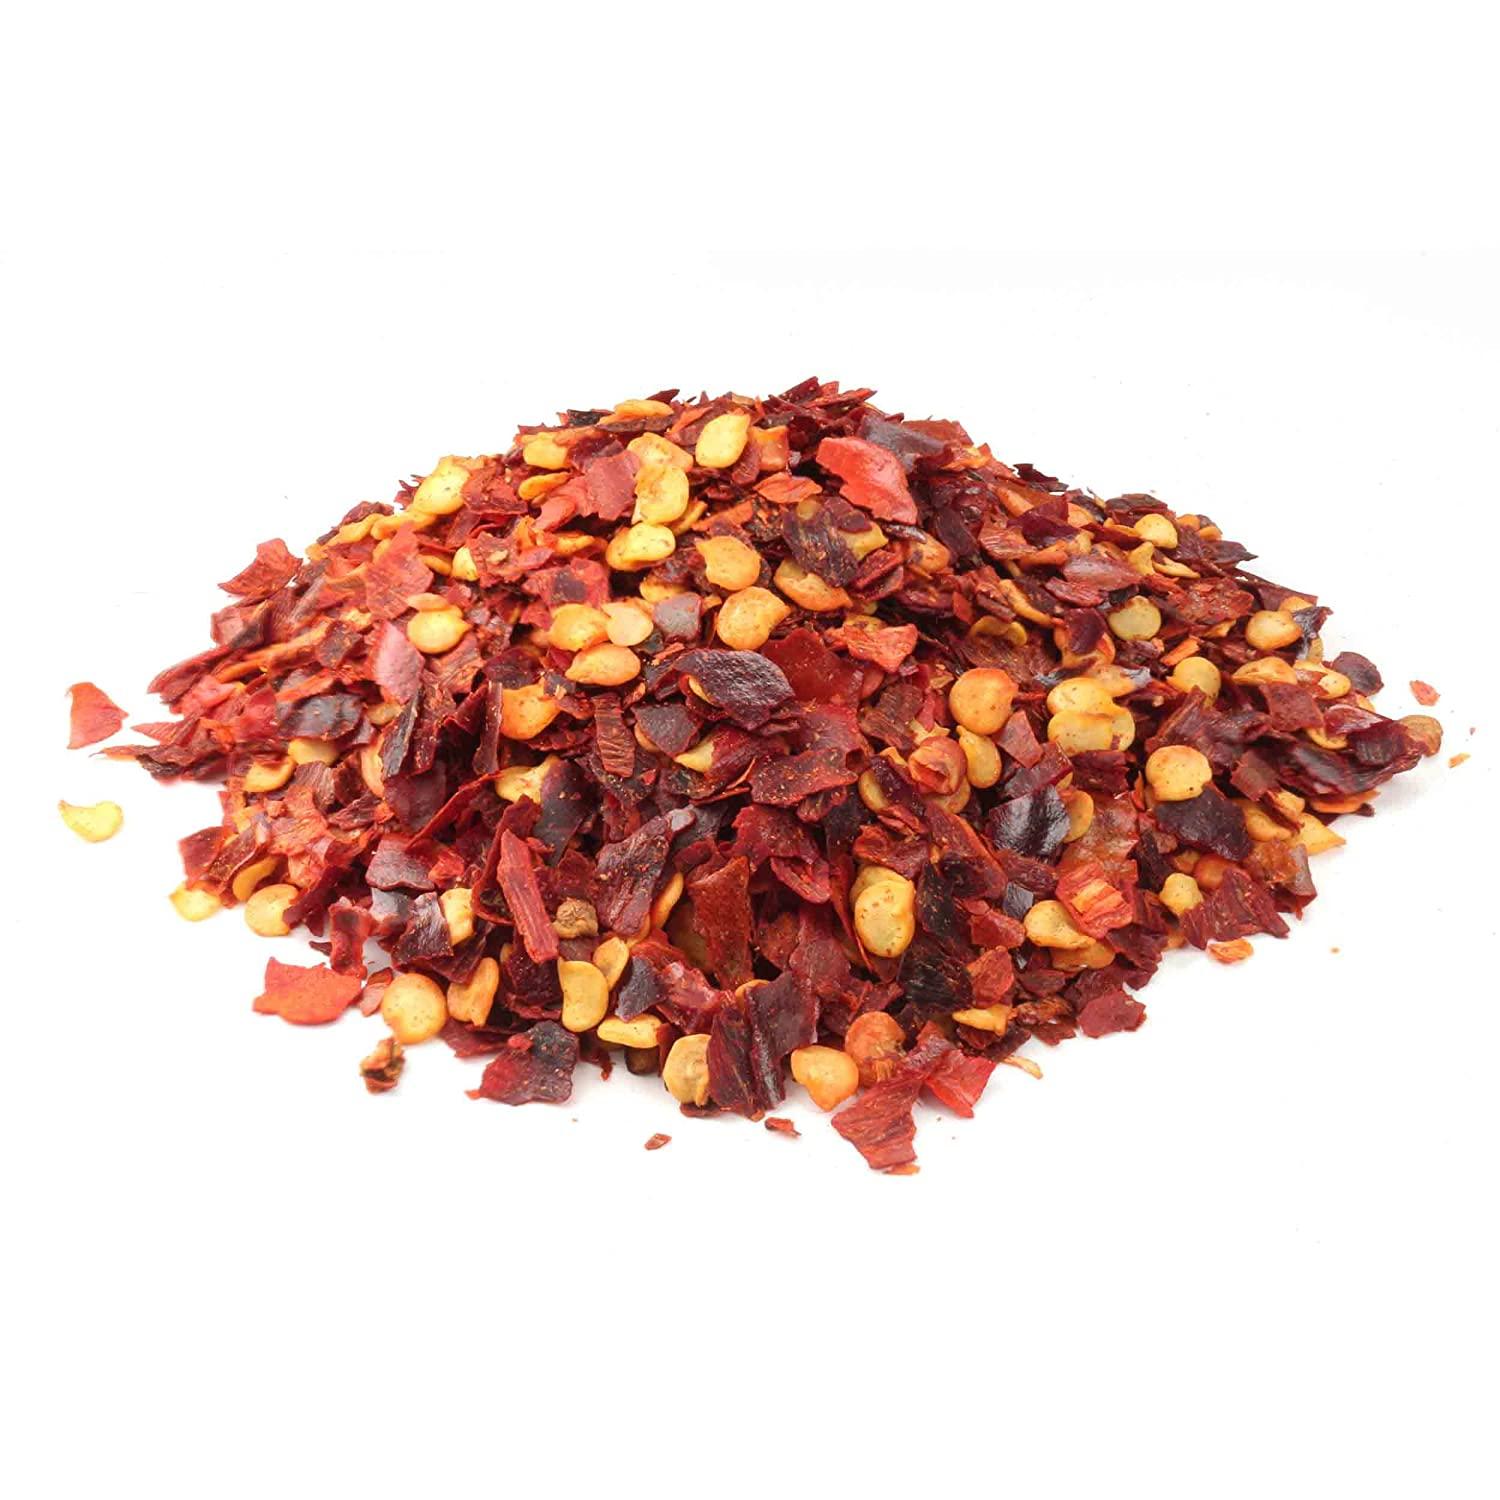 Brand - Happy Belly Red Pepper, Crushed, 2 Ounces